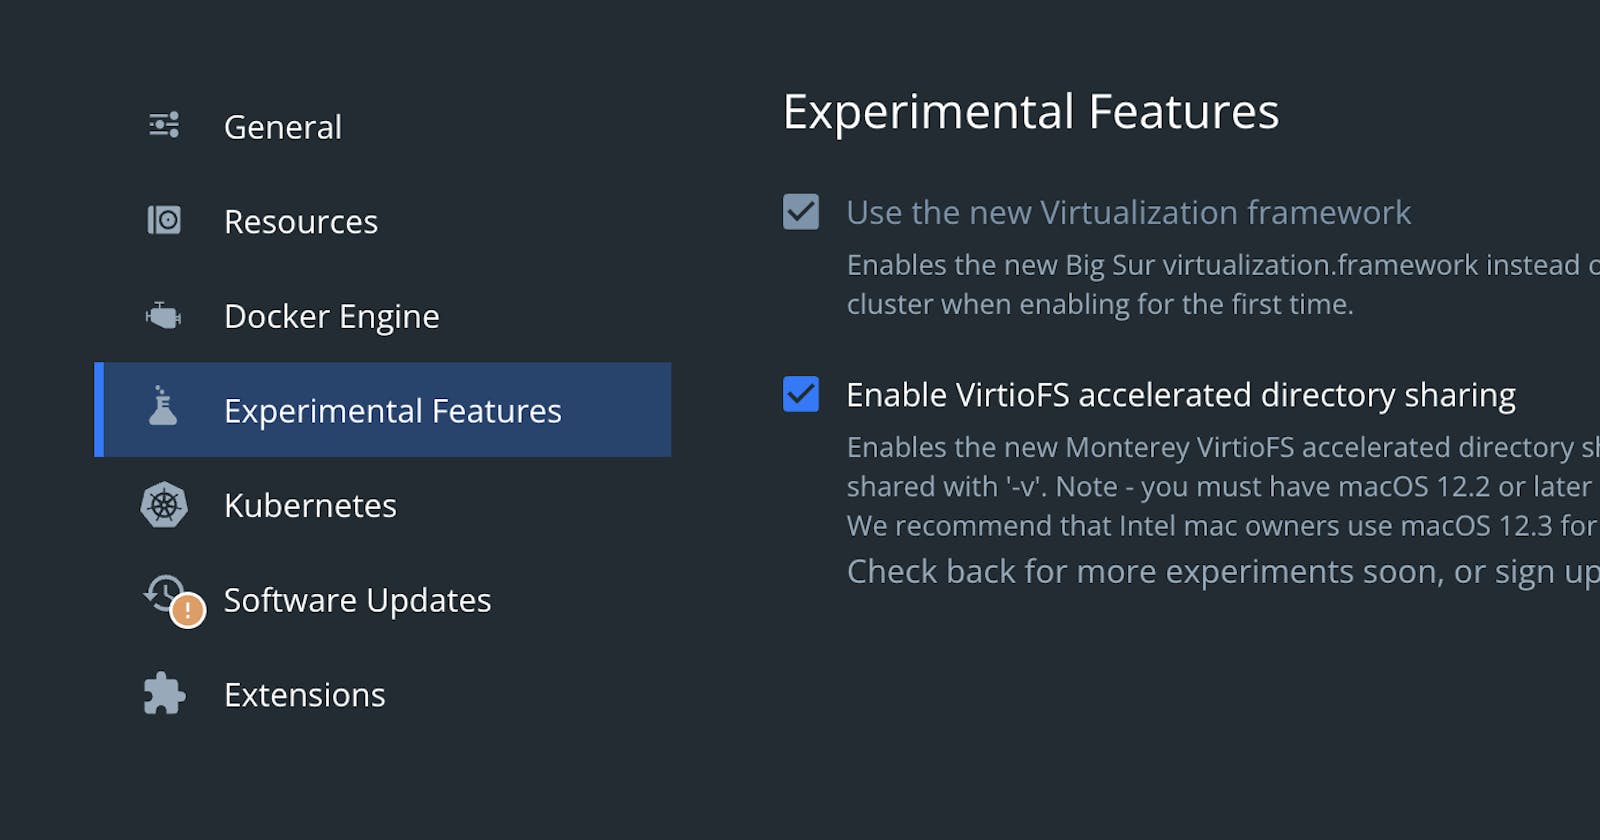 Speed-Up your Docker containers on macOS by enabling the new Virtualization Framework and VirtioFS